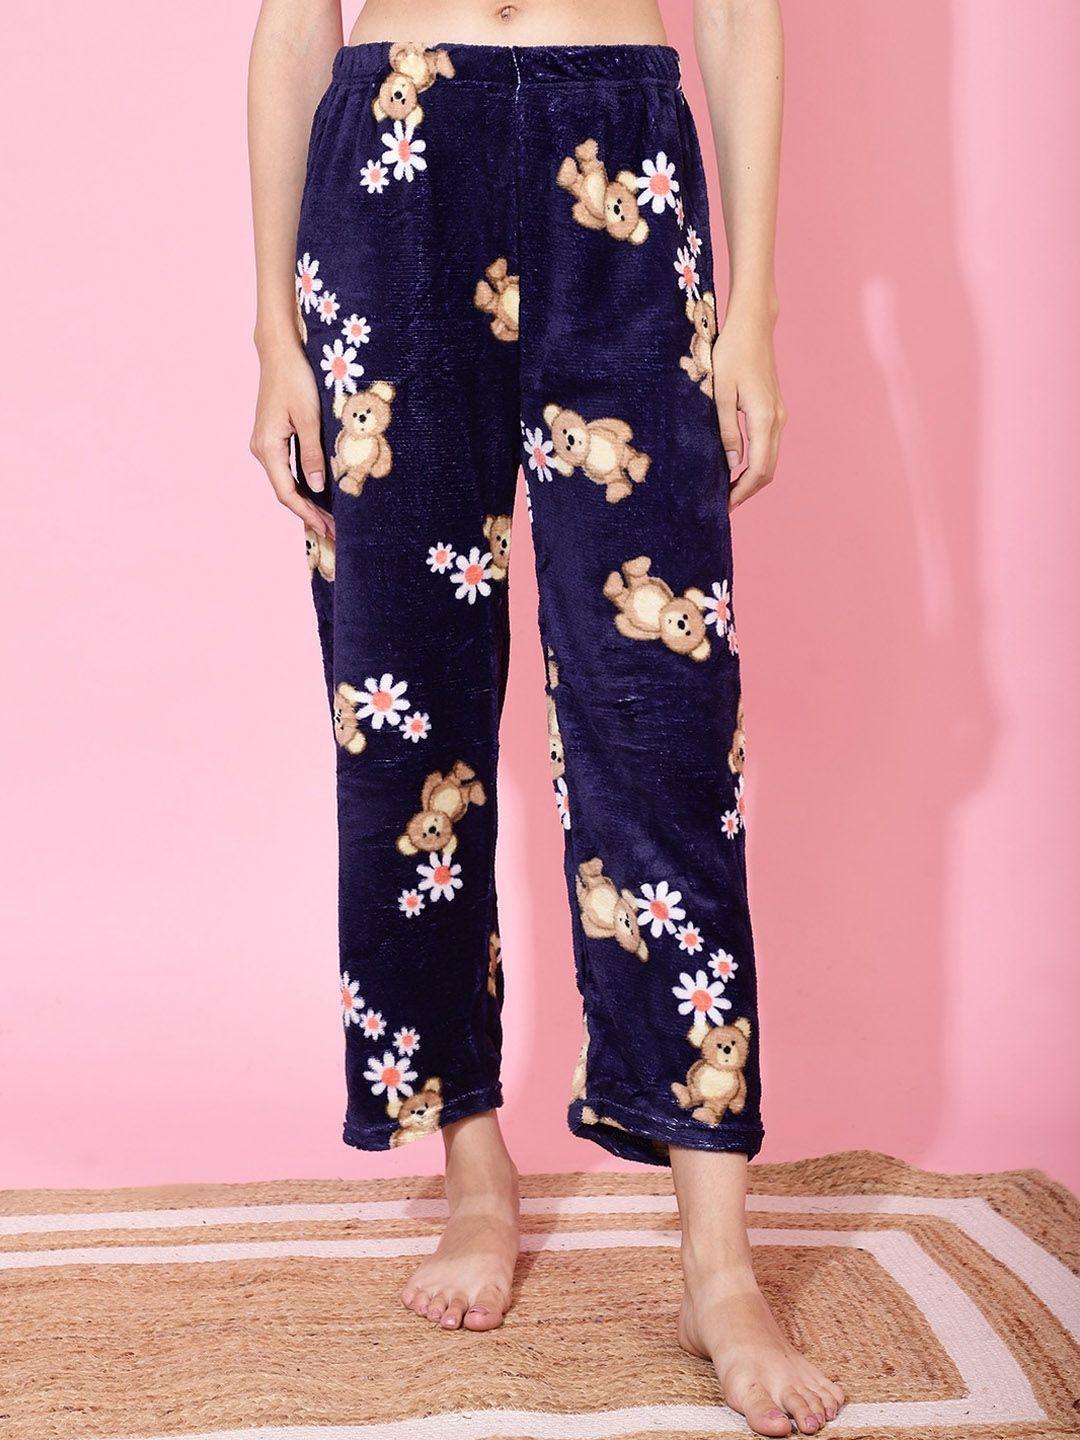 tag 7 women conversational printed mid-rise lounge pants